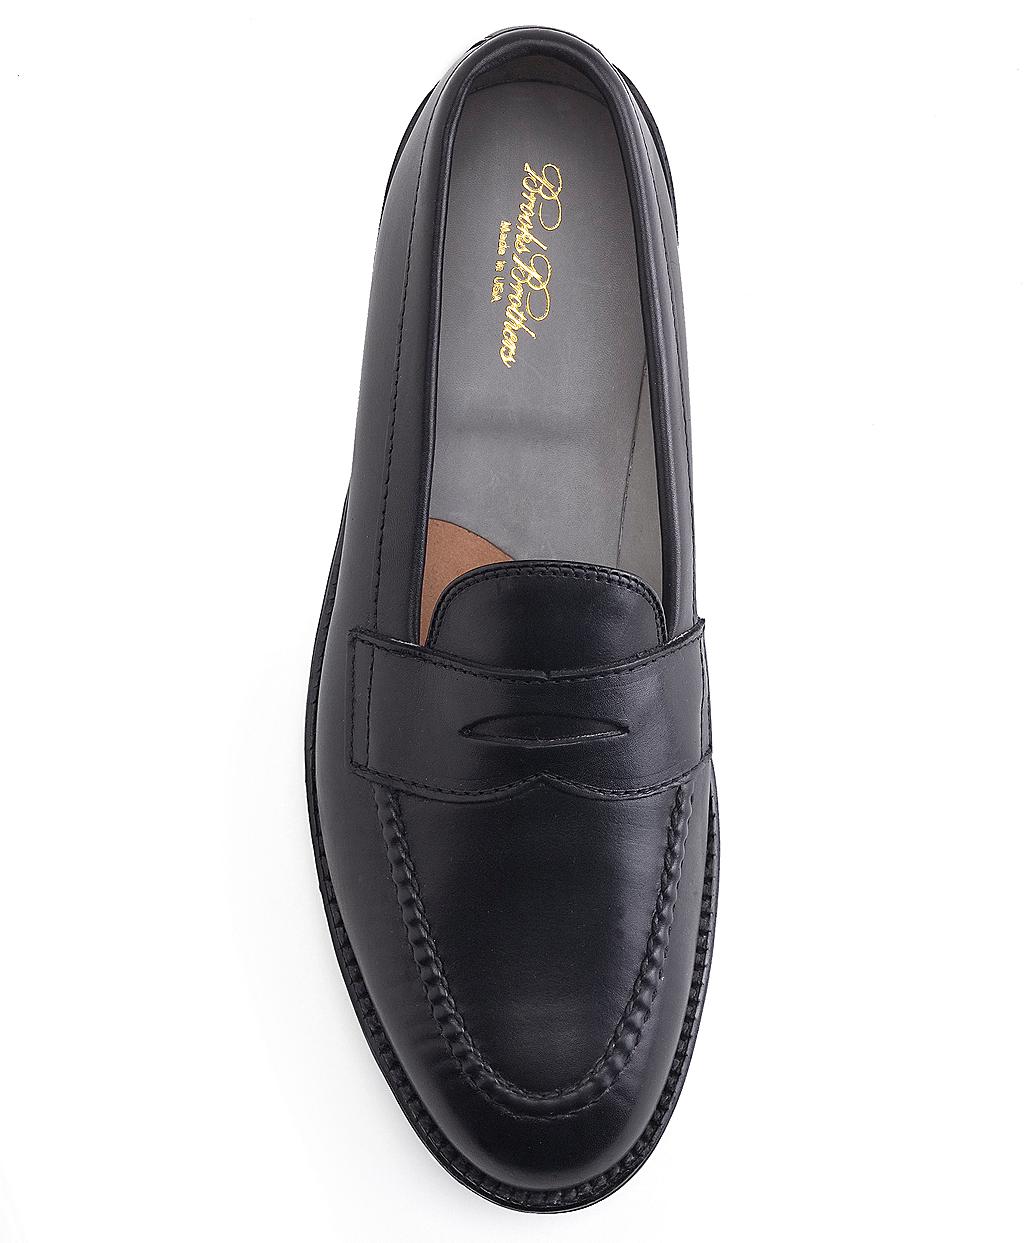 Brooks Brothers Hand Sewn Penny Loafer in Black for Men - Lyst